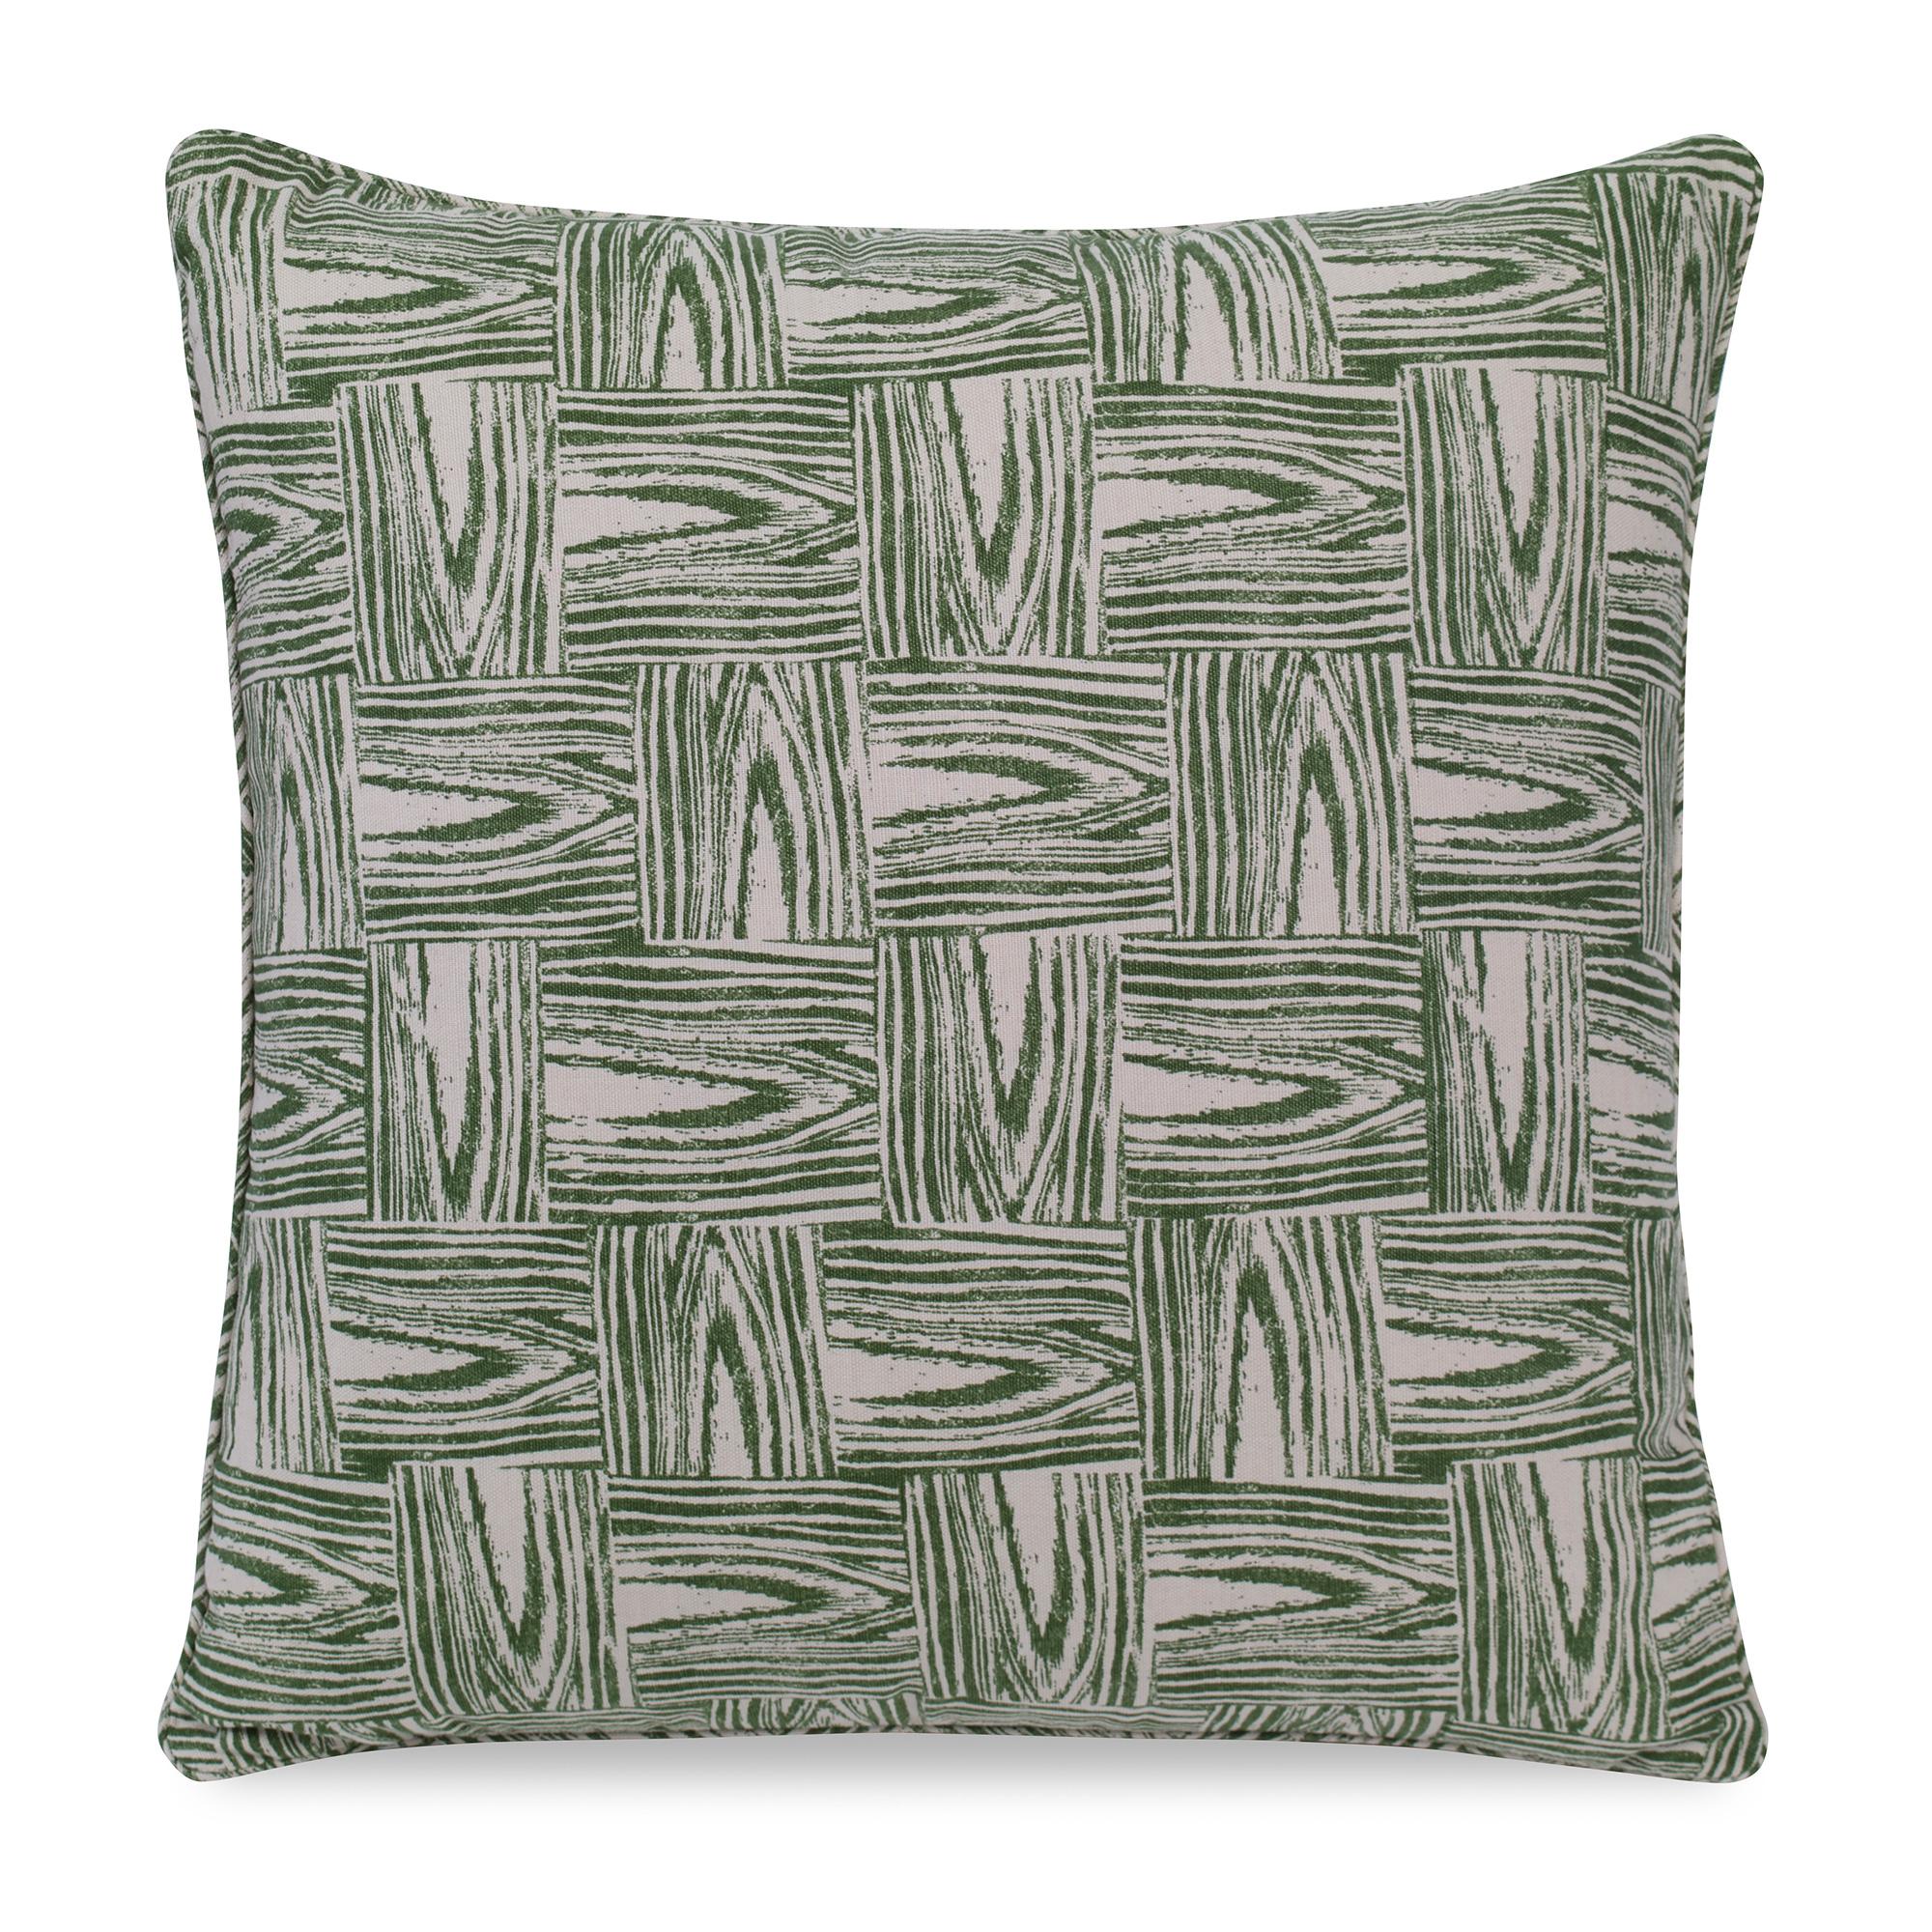 For Sale: Green (QR-20203.HUNTER.0) Timberline Decorative Accent Pillow by CuratedKravet